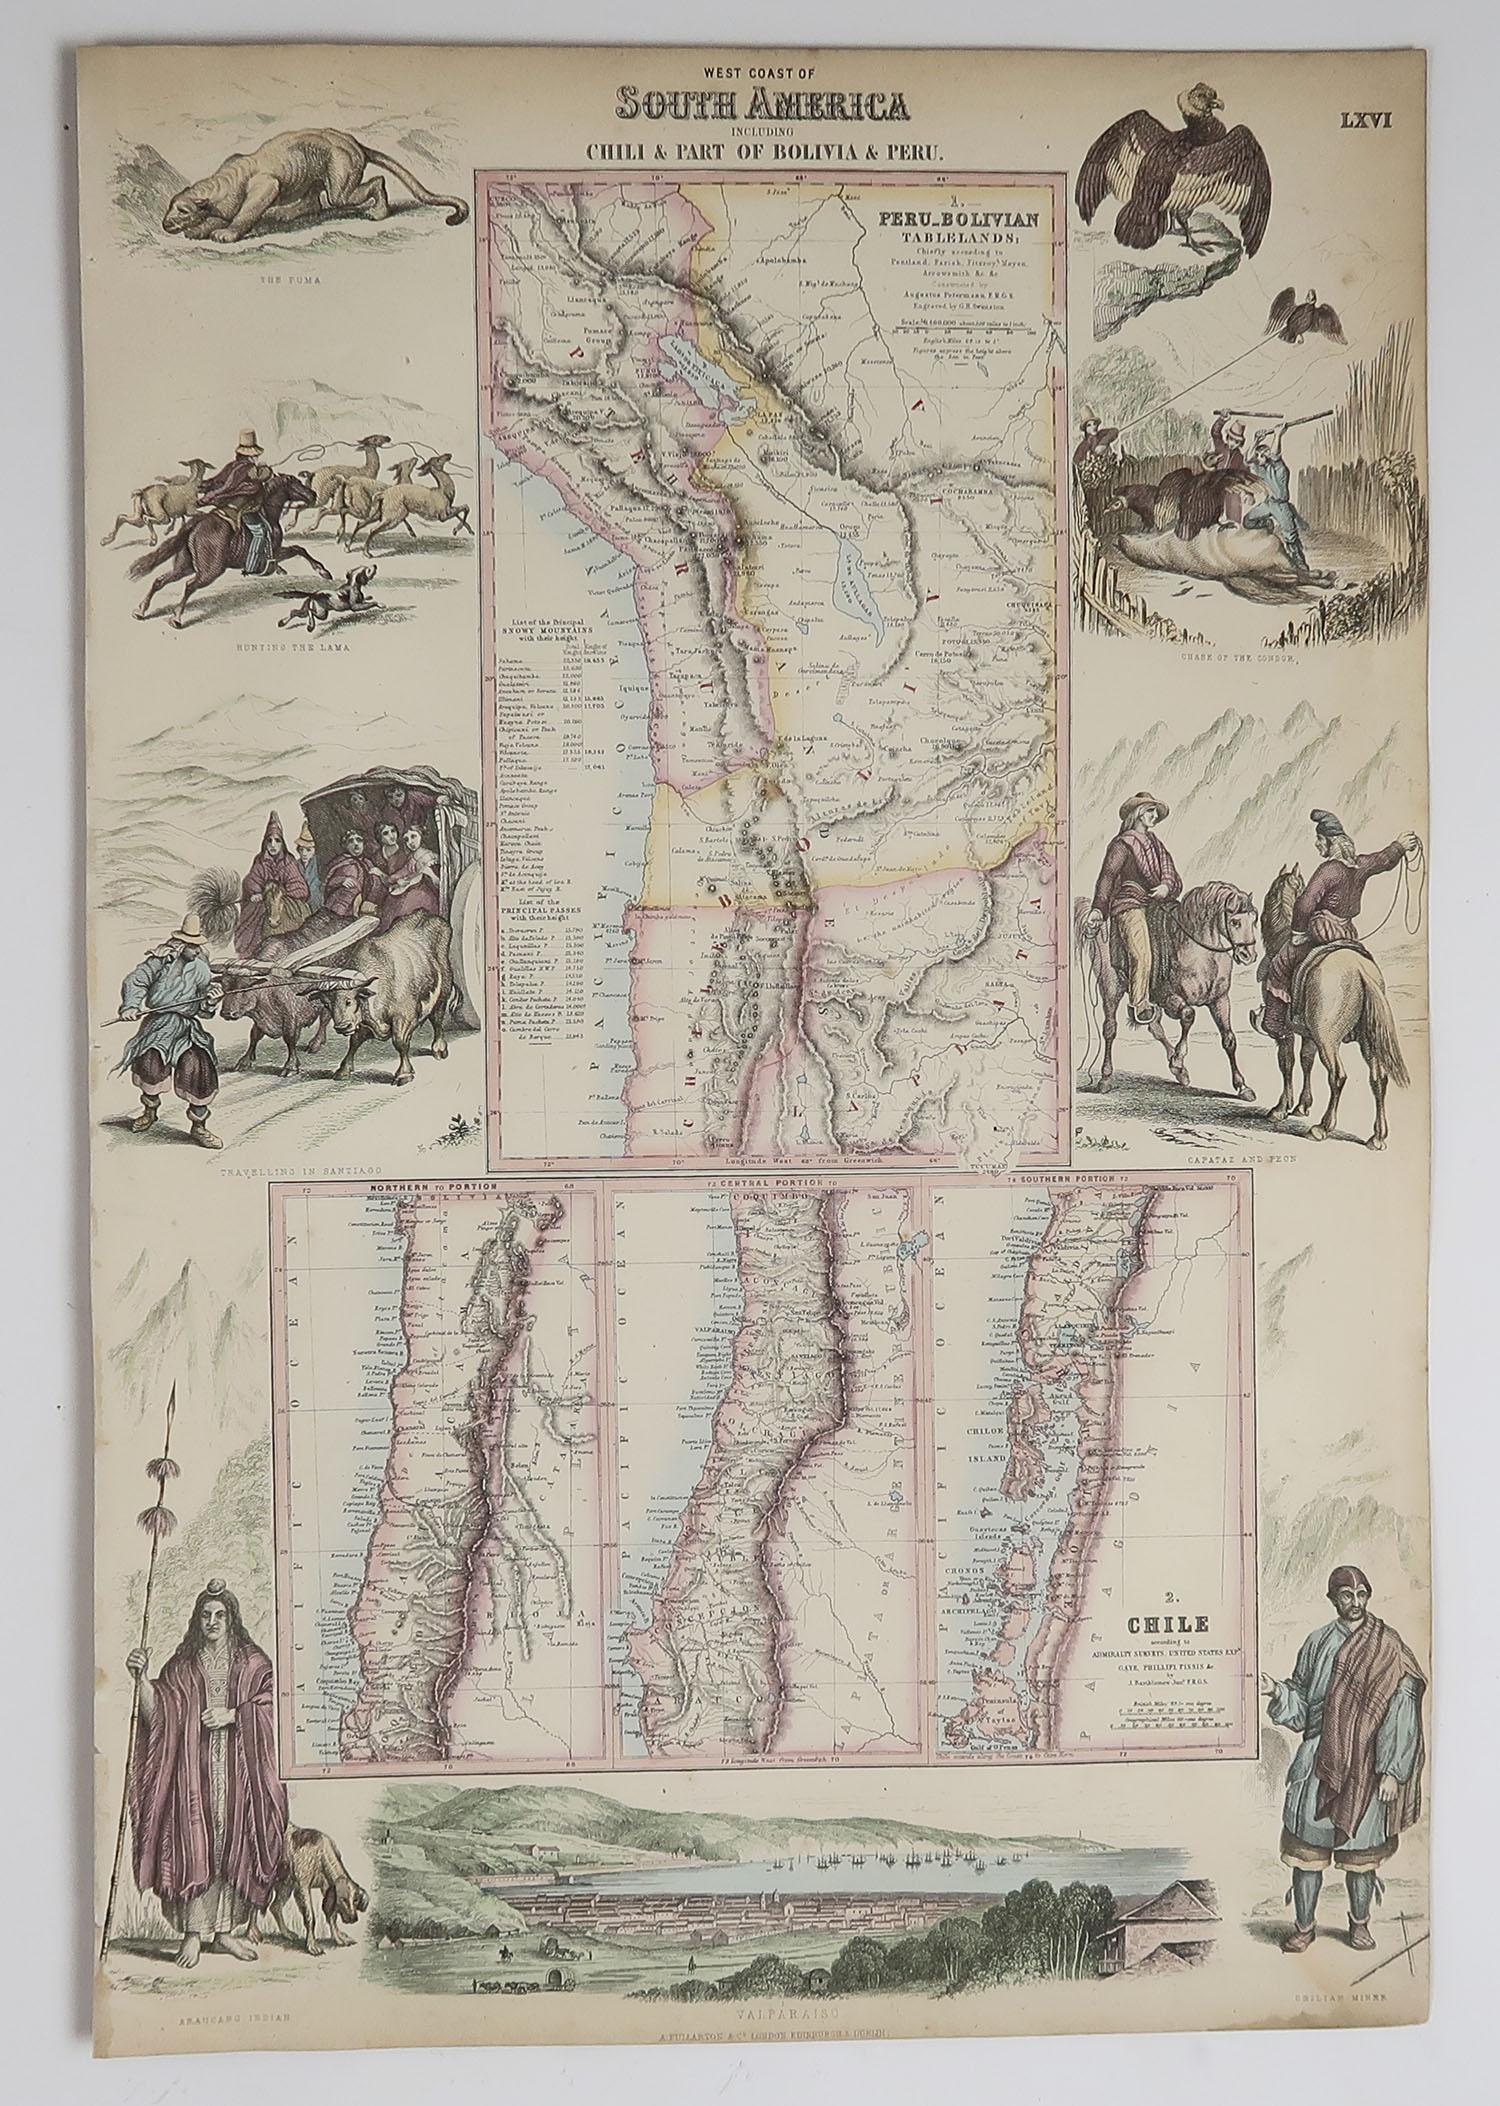 Great map of Chili, Peru and part of Bolivia

Wonderful figural border

From the celebrated Royal Illustrated Atlas

Lithograph. Original color. 

Published by Fullarton, Edinburgh, C.1870

Unframed.










